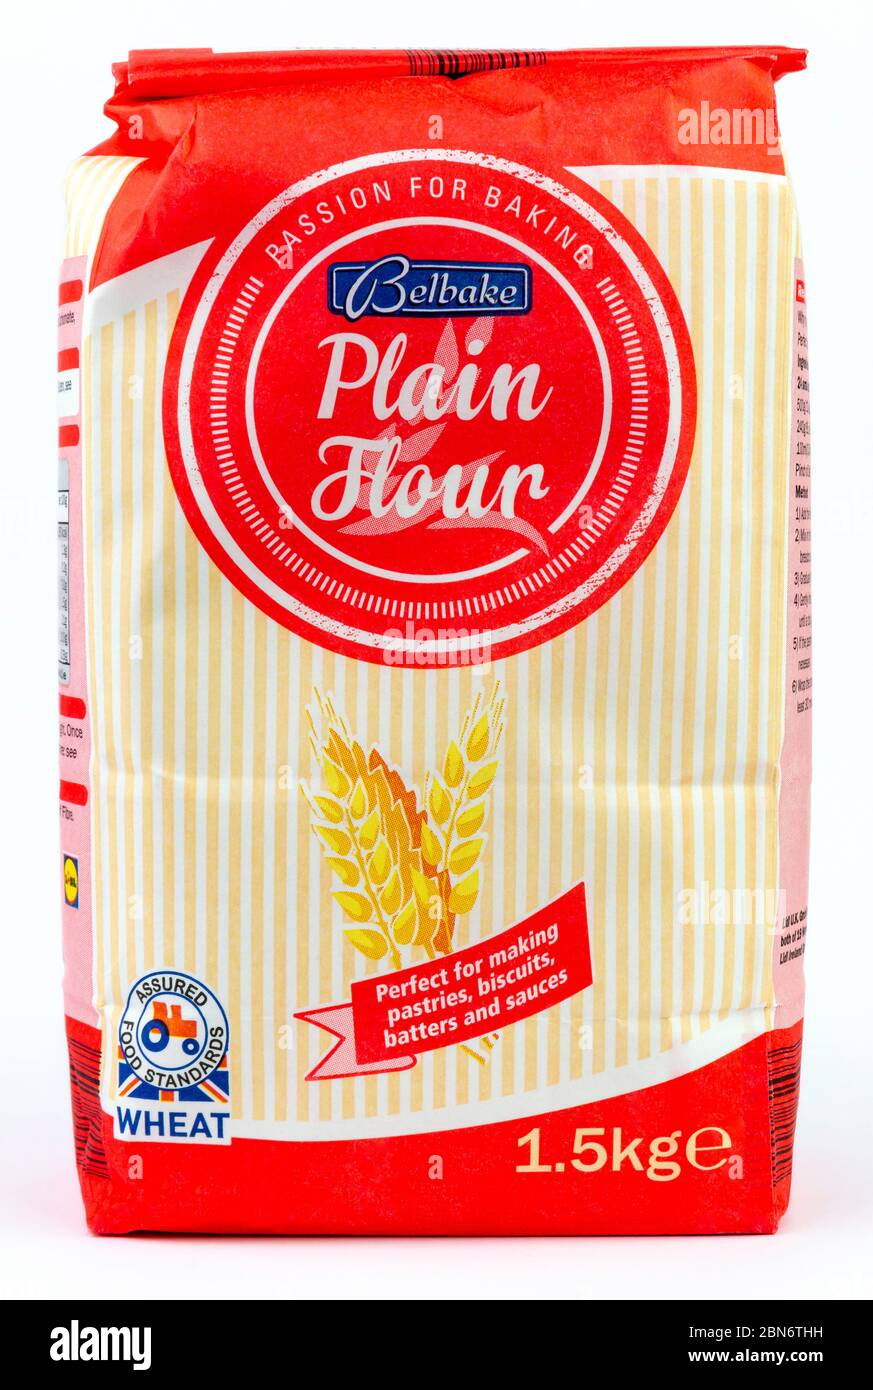 Coventry, West Midlands, UK - May 13, 2020: Bag of Lidl brand Belbake plain flour unopened on an isolated white background Stock Photo